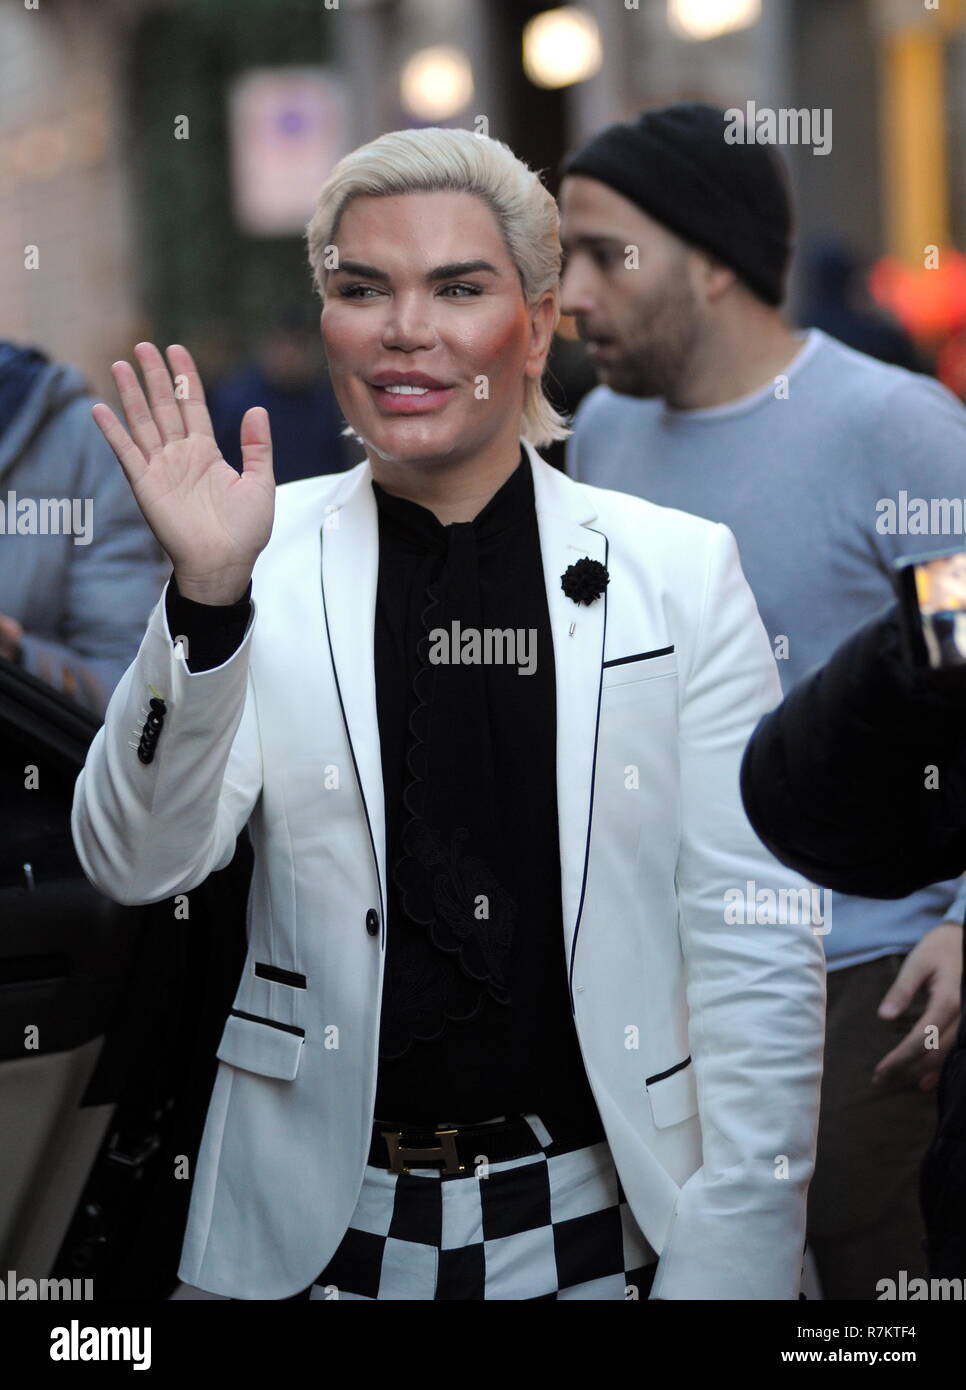 Milan, Italy. 10th December 2018. Rodrigo Alves shopping center Rodrigo Alves, the "human Ken", surprised walking through the streets of downtown while doing some shopping. Here he is while he visits the "GUCCI" boutique in via Montenapoleone, then a car arrives that will take him back to the hotel. Credit: Independent Photo Agency Srl/Alamy Live News Stock Photo